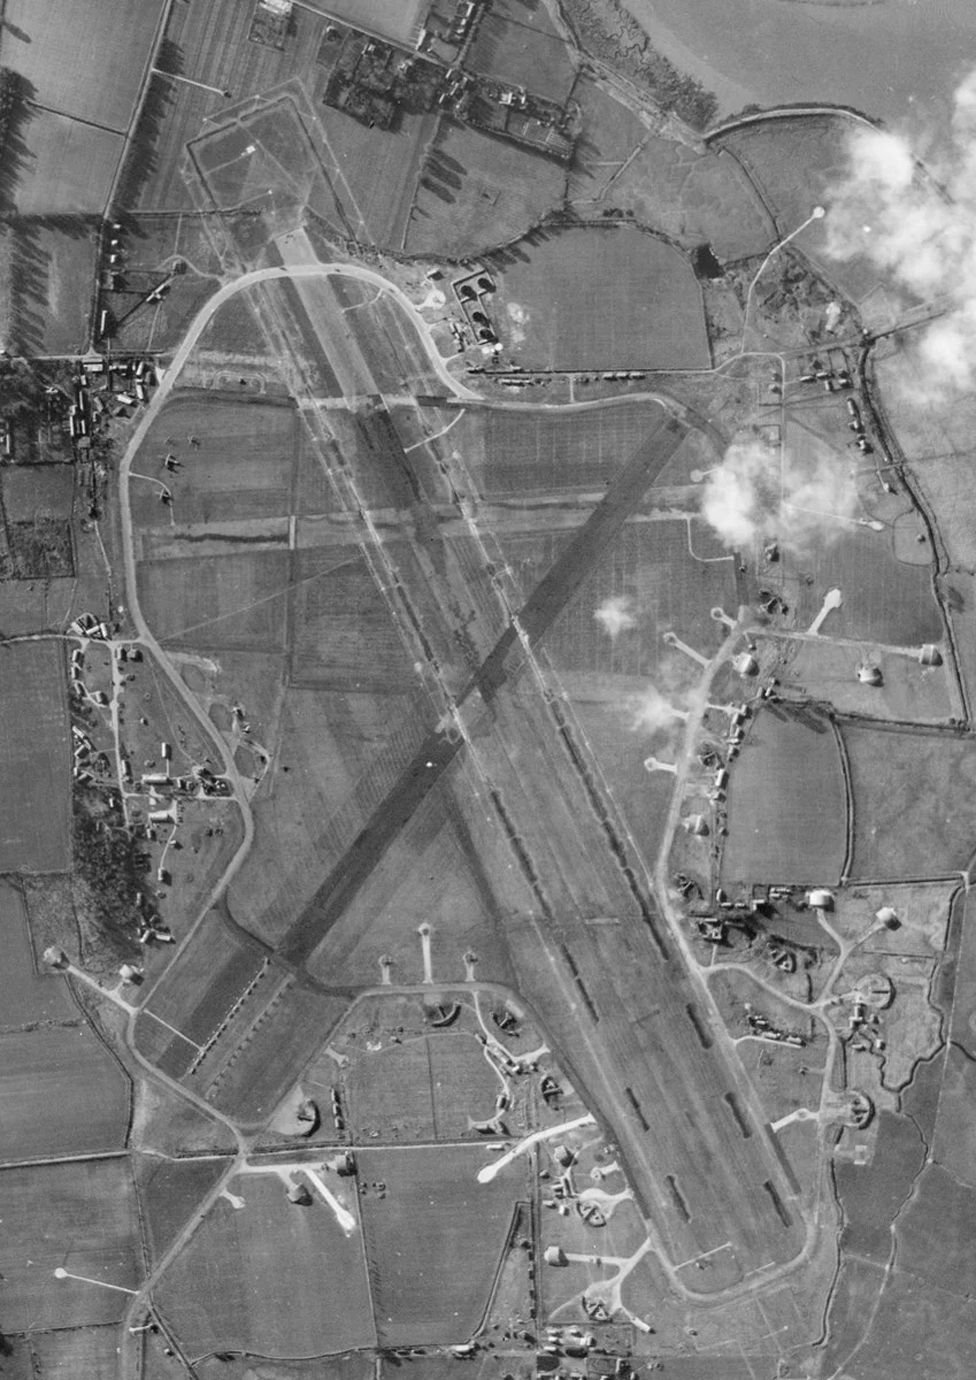 Detail showing the extended runways and dispersal areas of RAF Bradwell Bay, Essex, on 25 January 1944.